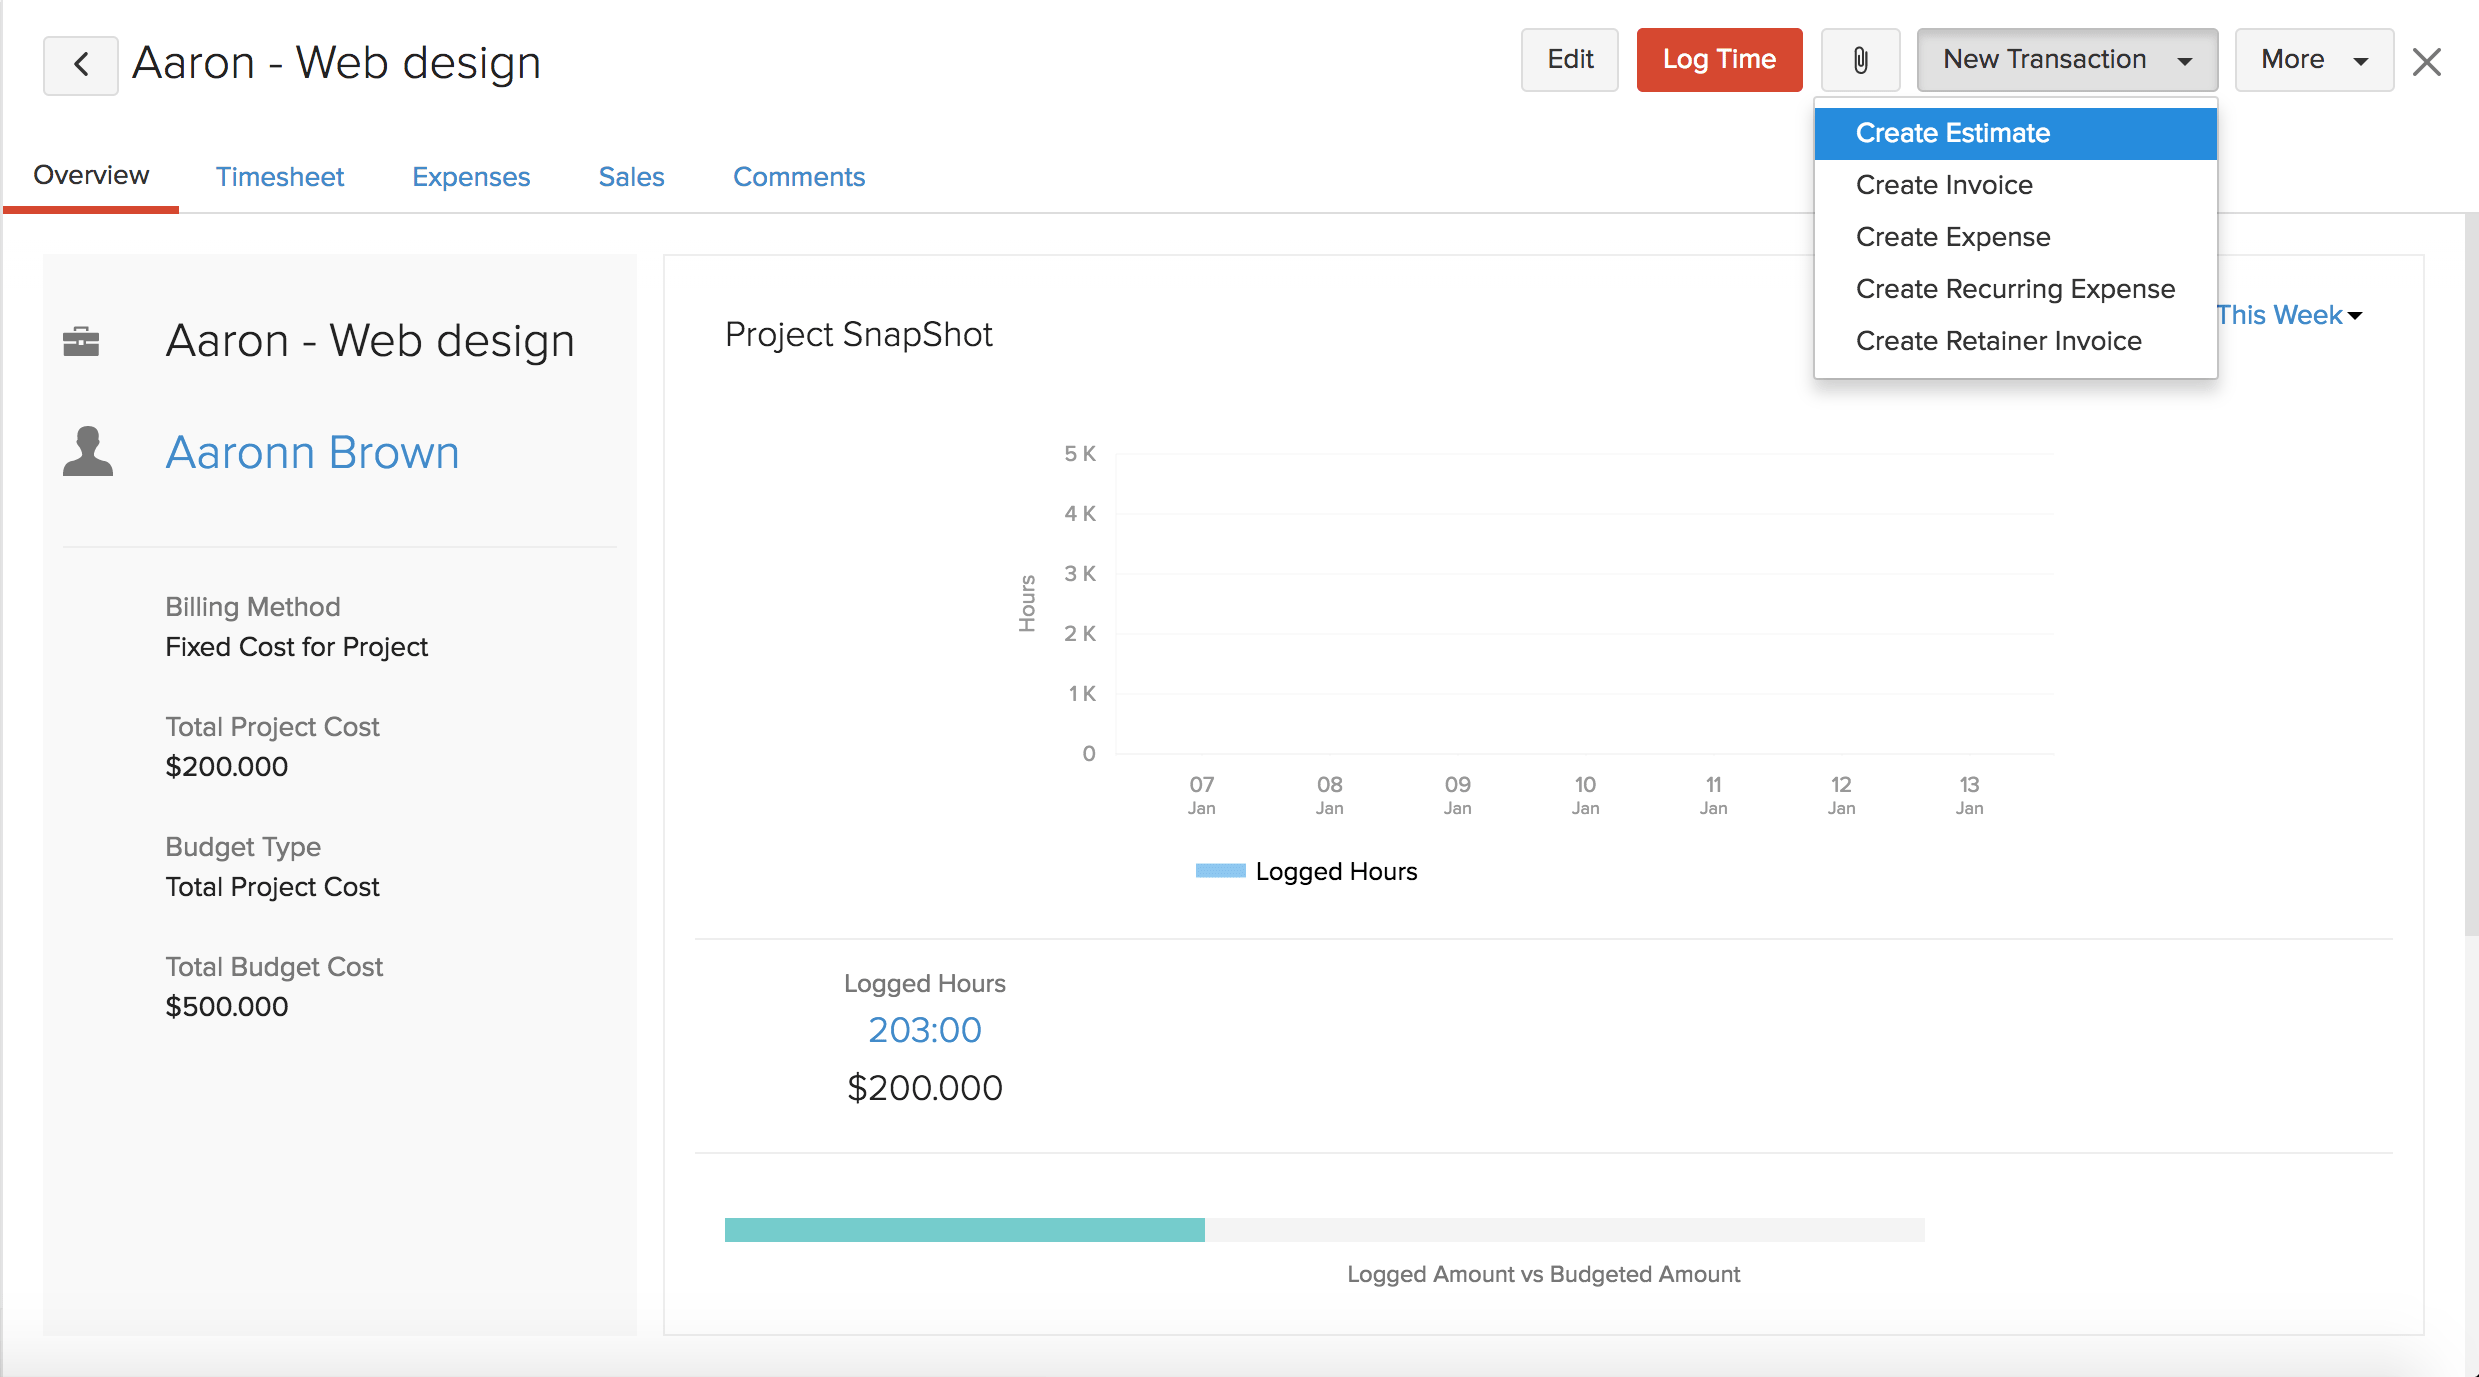 Estimate from Projects